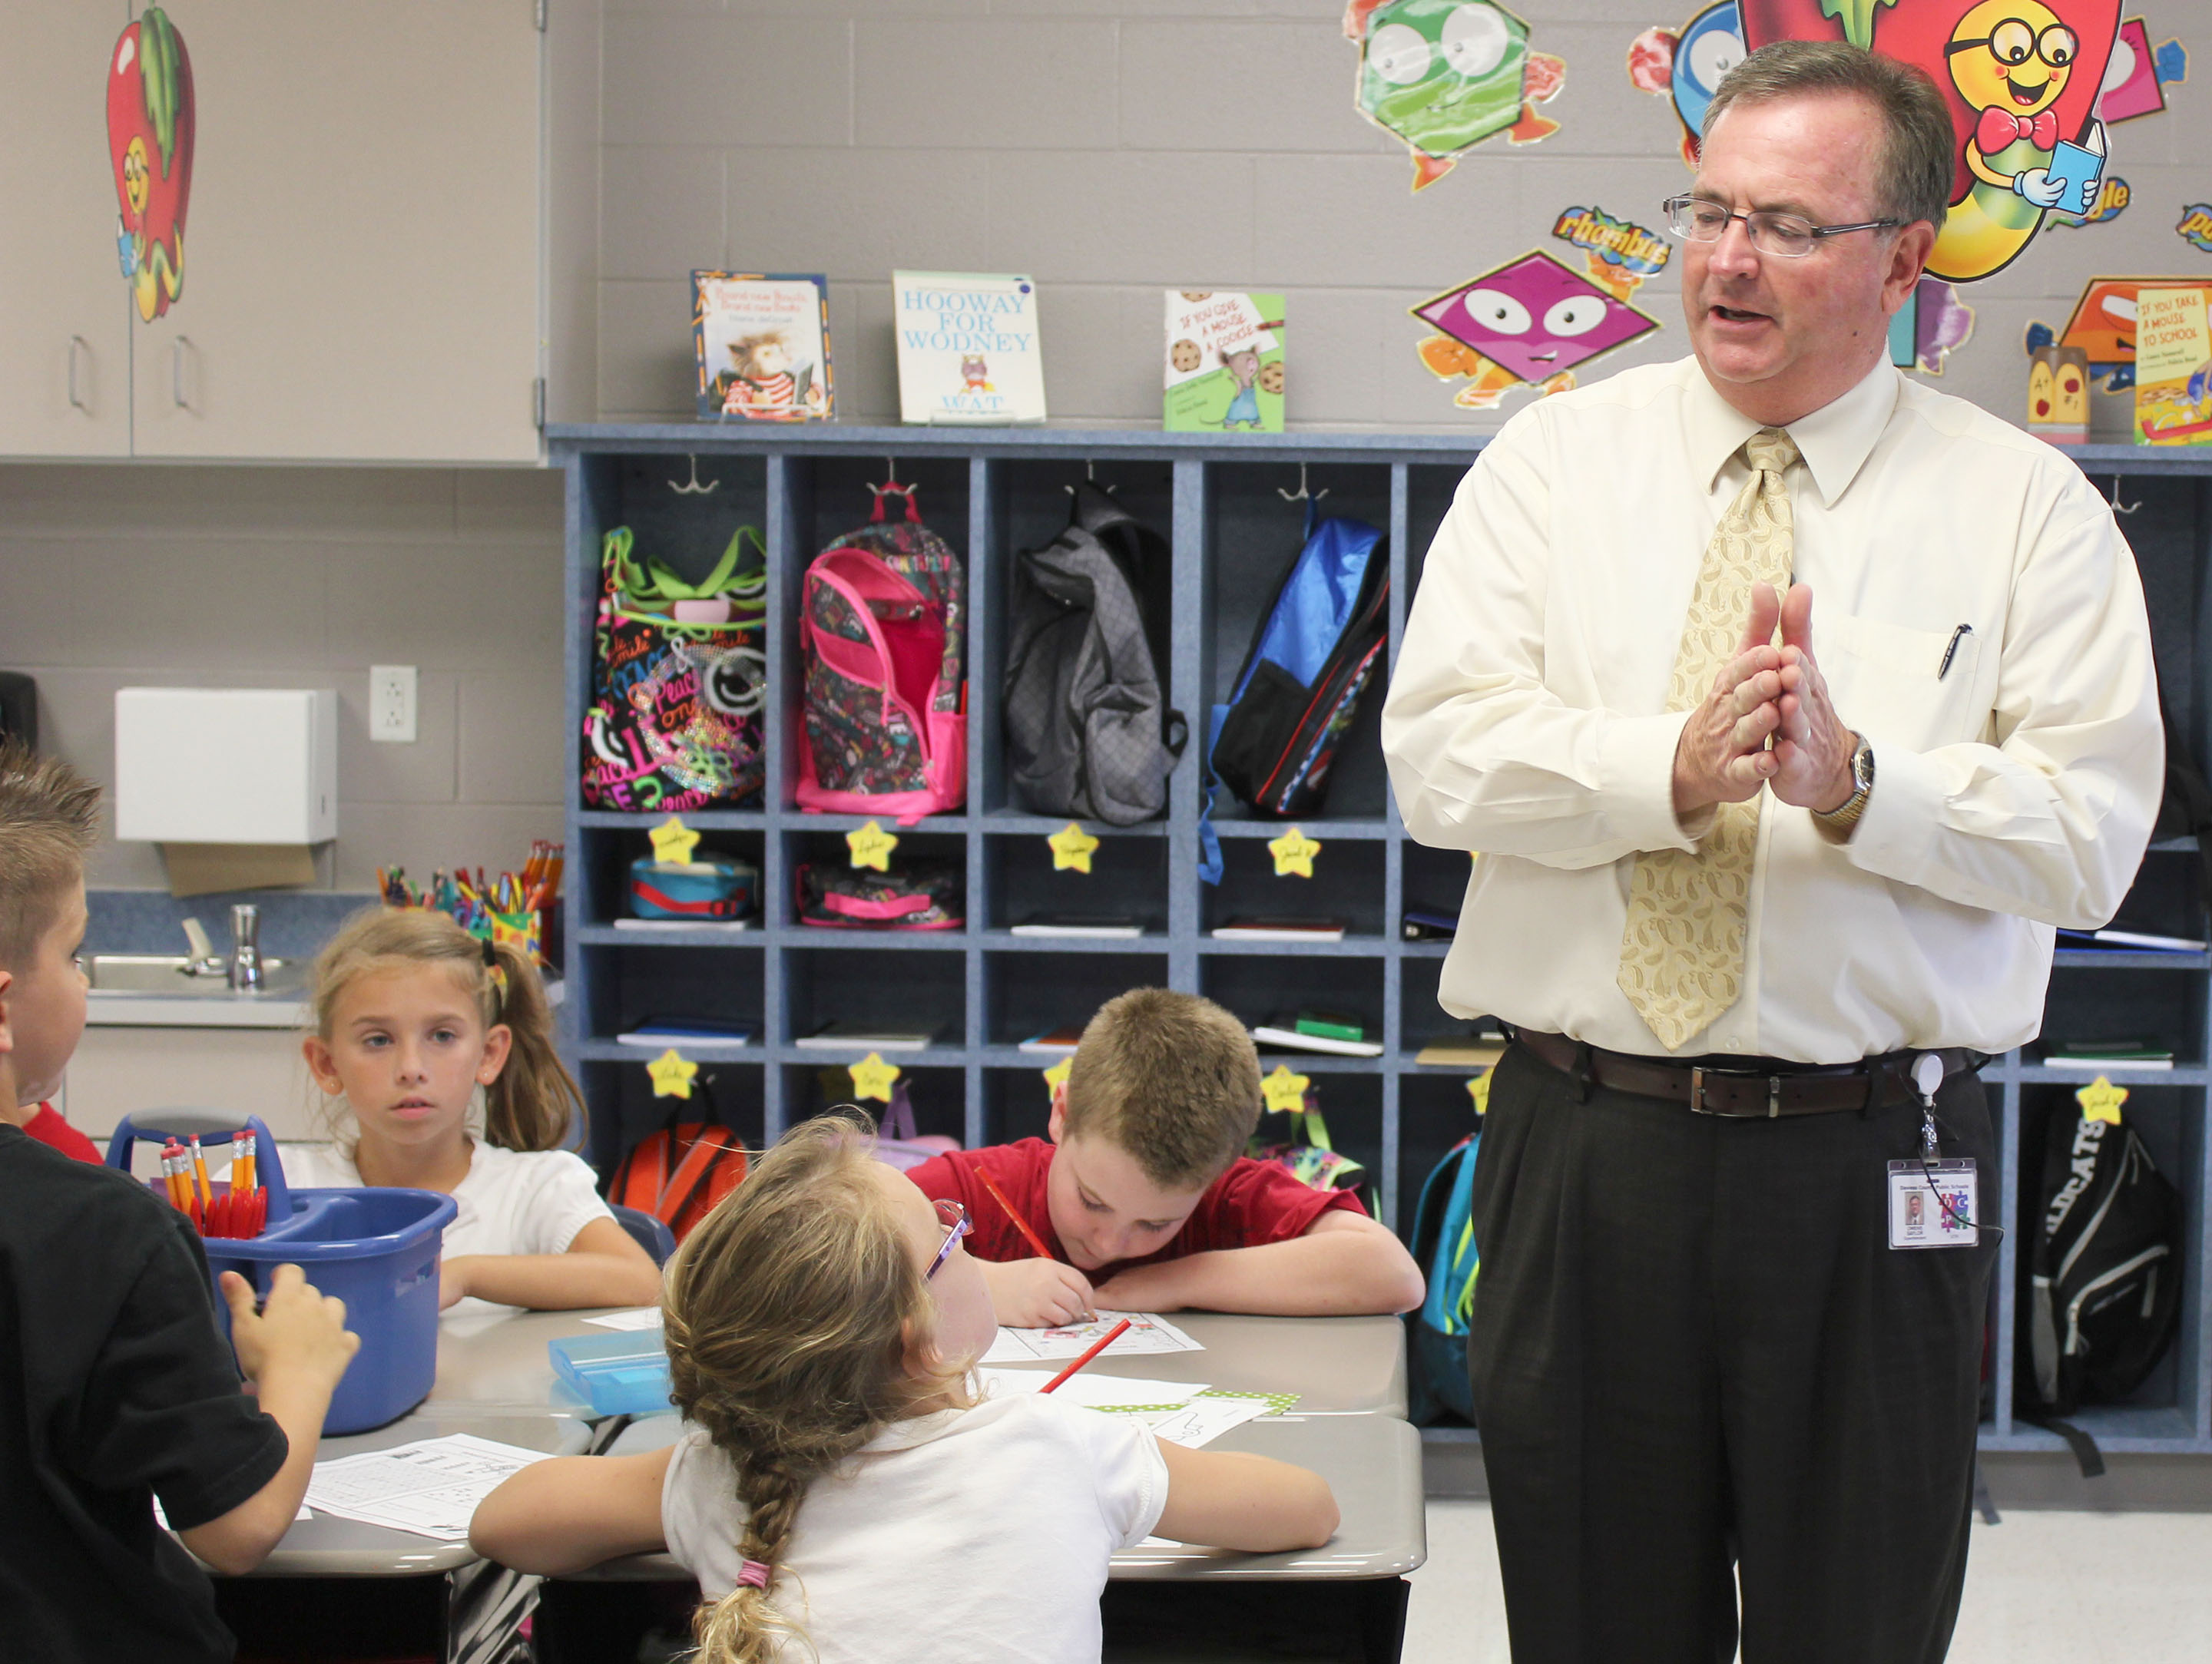 Owens Saylor, superintendent of the Daviess County school district, visits an elementary school classroom in his district. Saylor, who was named the 2016 Superintendent of the Year by the Kentucky Association of School Administrators, has led a program that introduces students to college campuses while they are still in elementary school. Photo by Lora Wimsatt